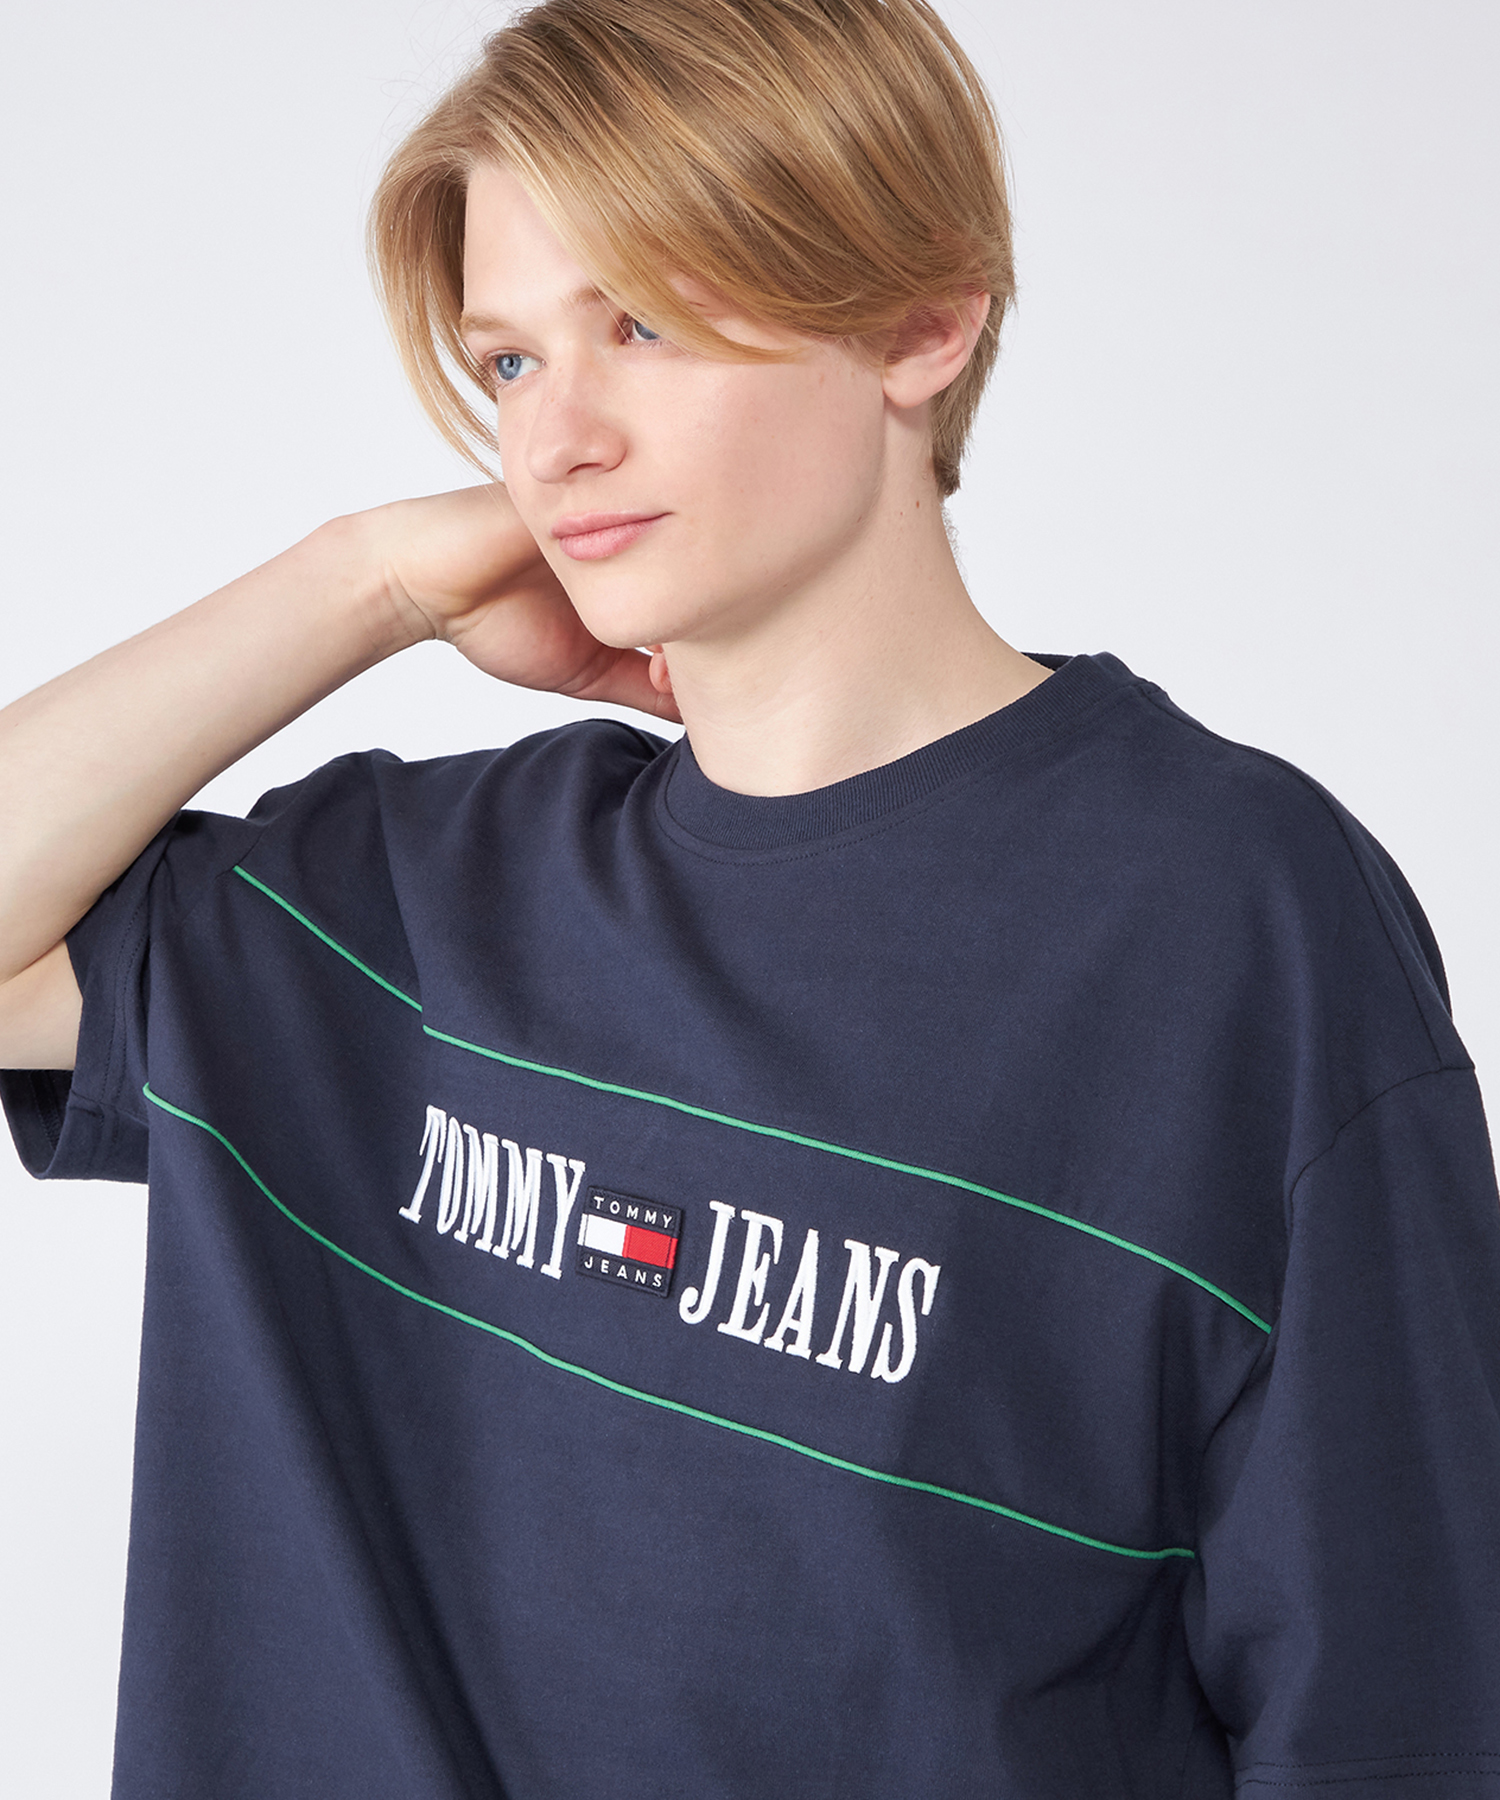 Tommy jeans ロングTシャツ